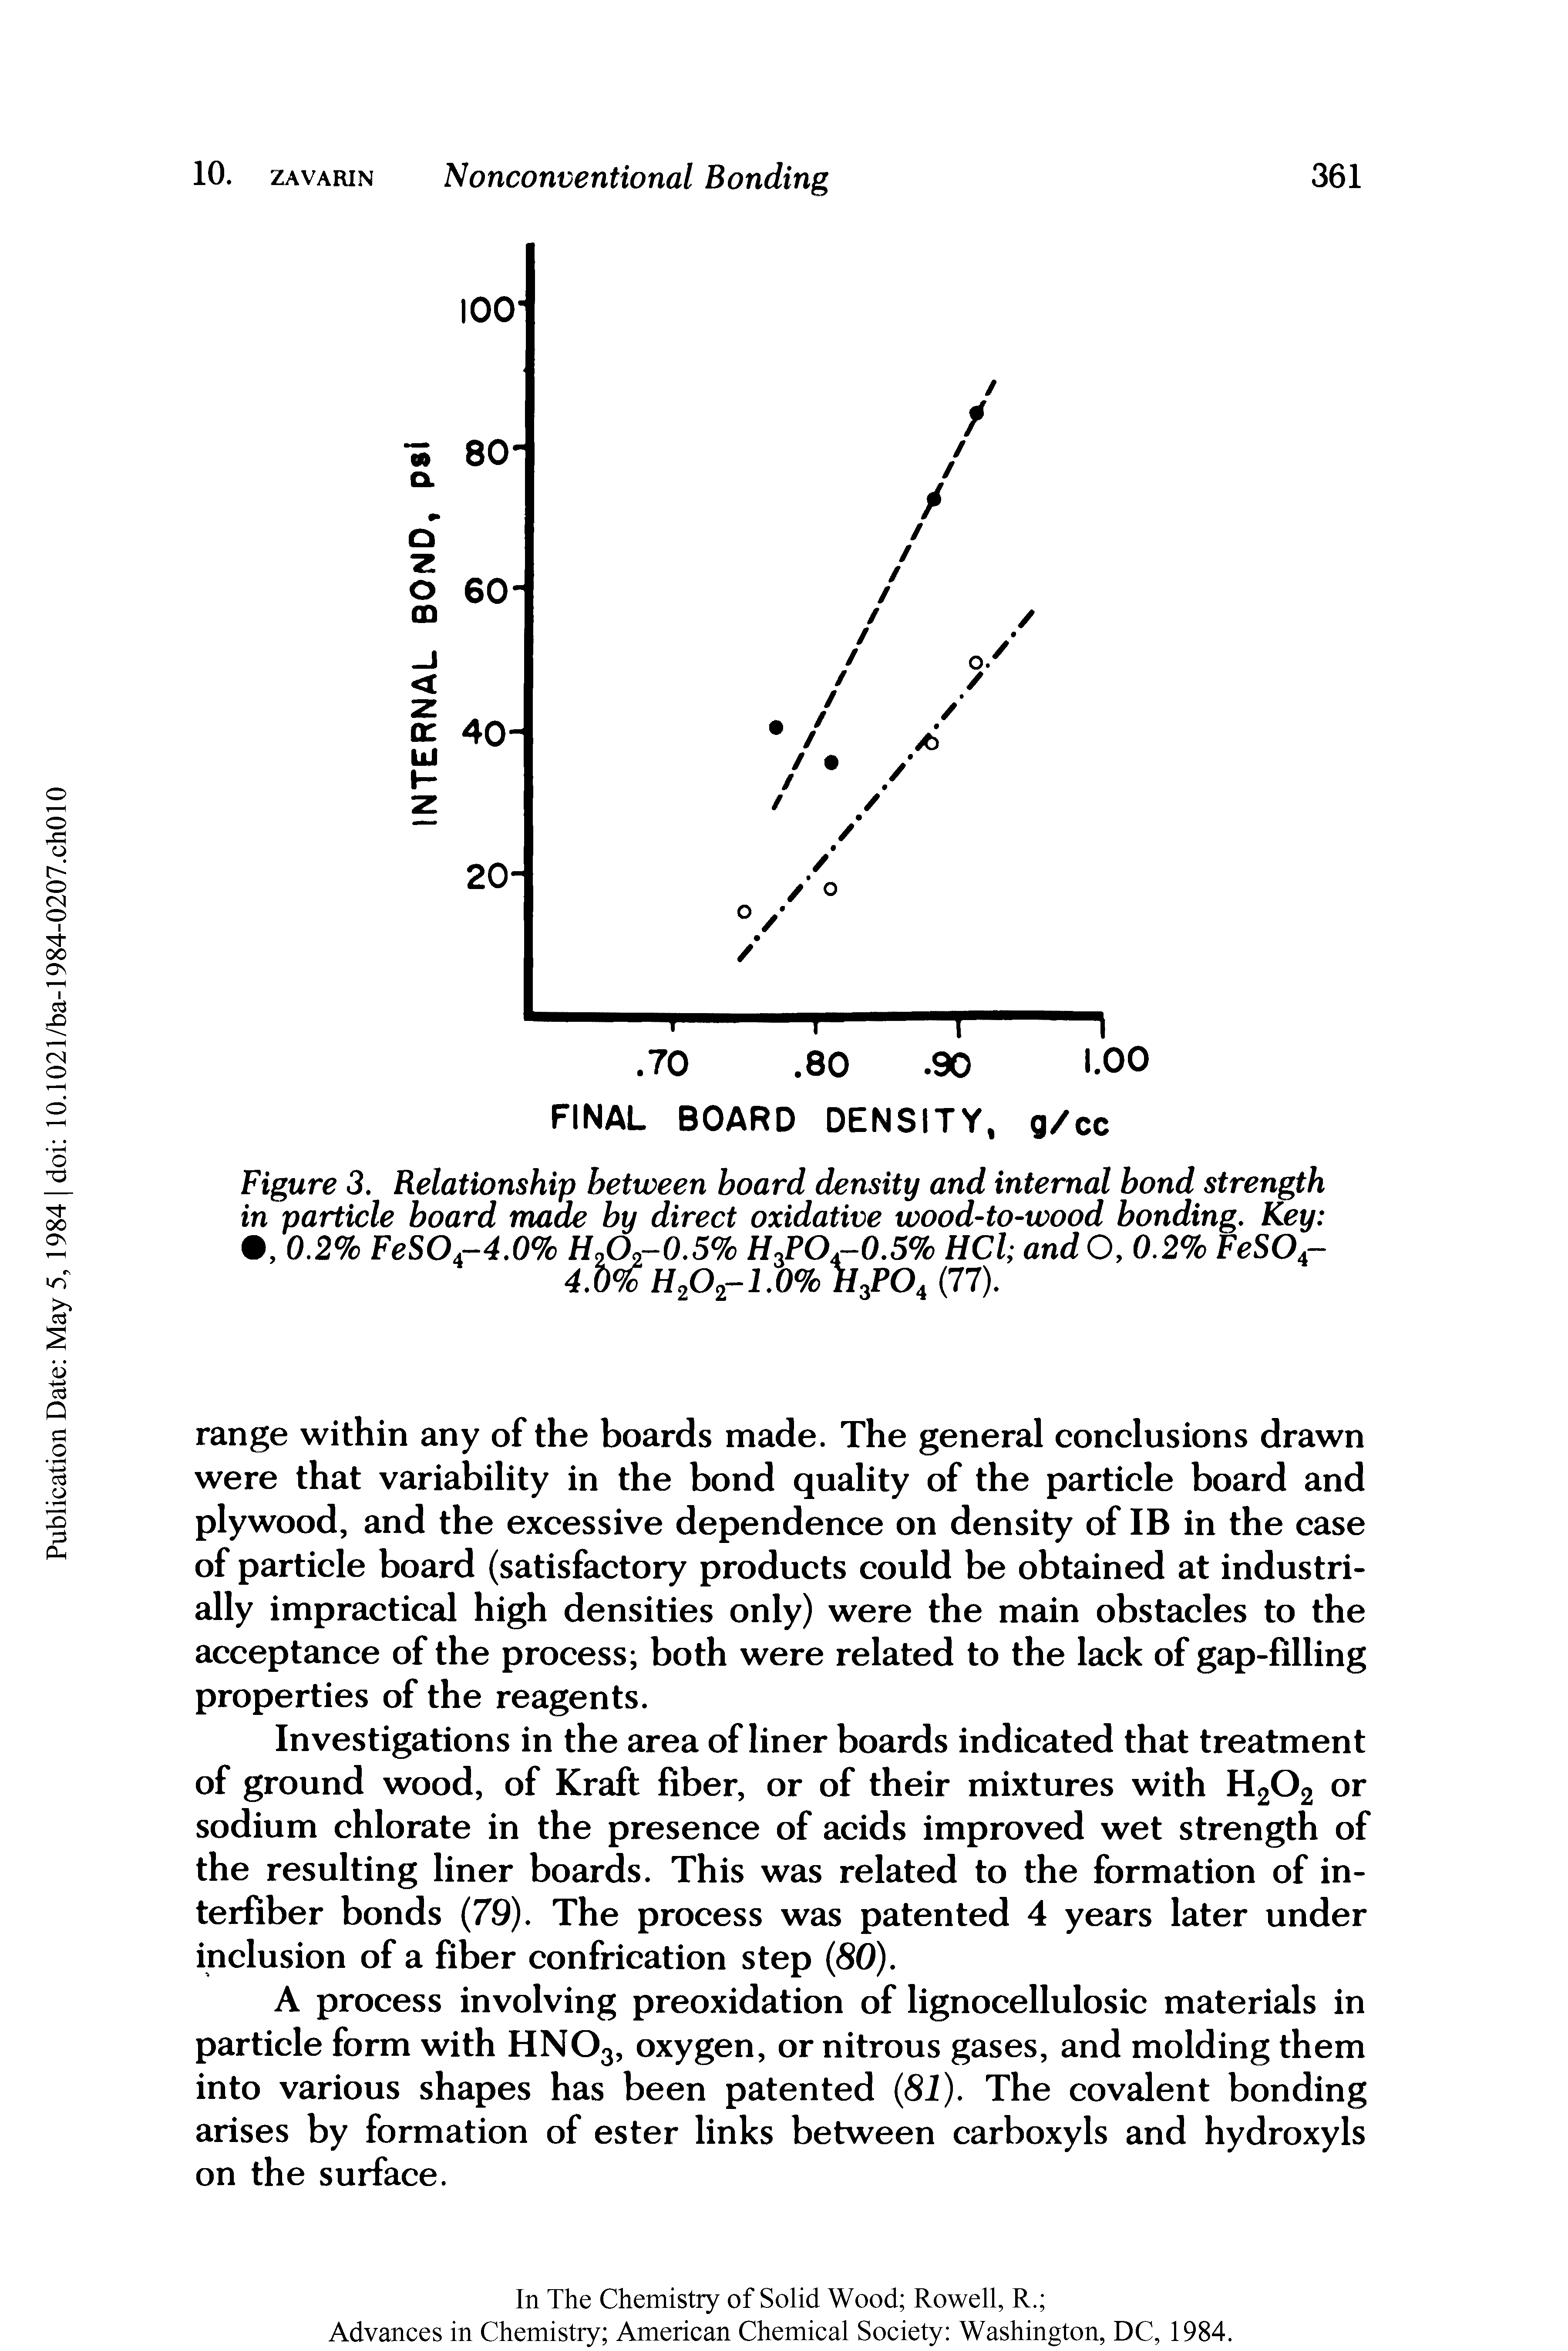 Figure 3. Relationship between board density and internal bond strength in particle board made by direct oxidative wood-to-wood bonding. Key , 0.2% FeSO.-4.0% HJD.-0.5% H.PO.-0.5% HCl and O, 0.2% FeSO -4.0% H202-1.0% H PO (77).